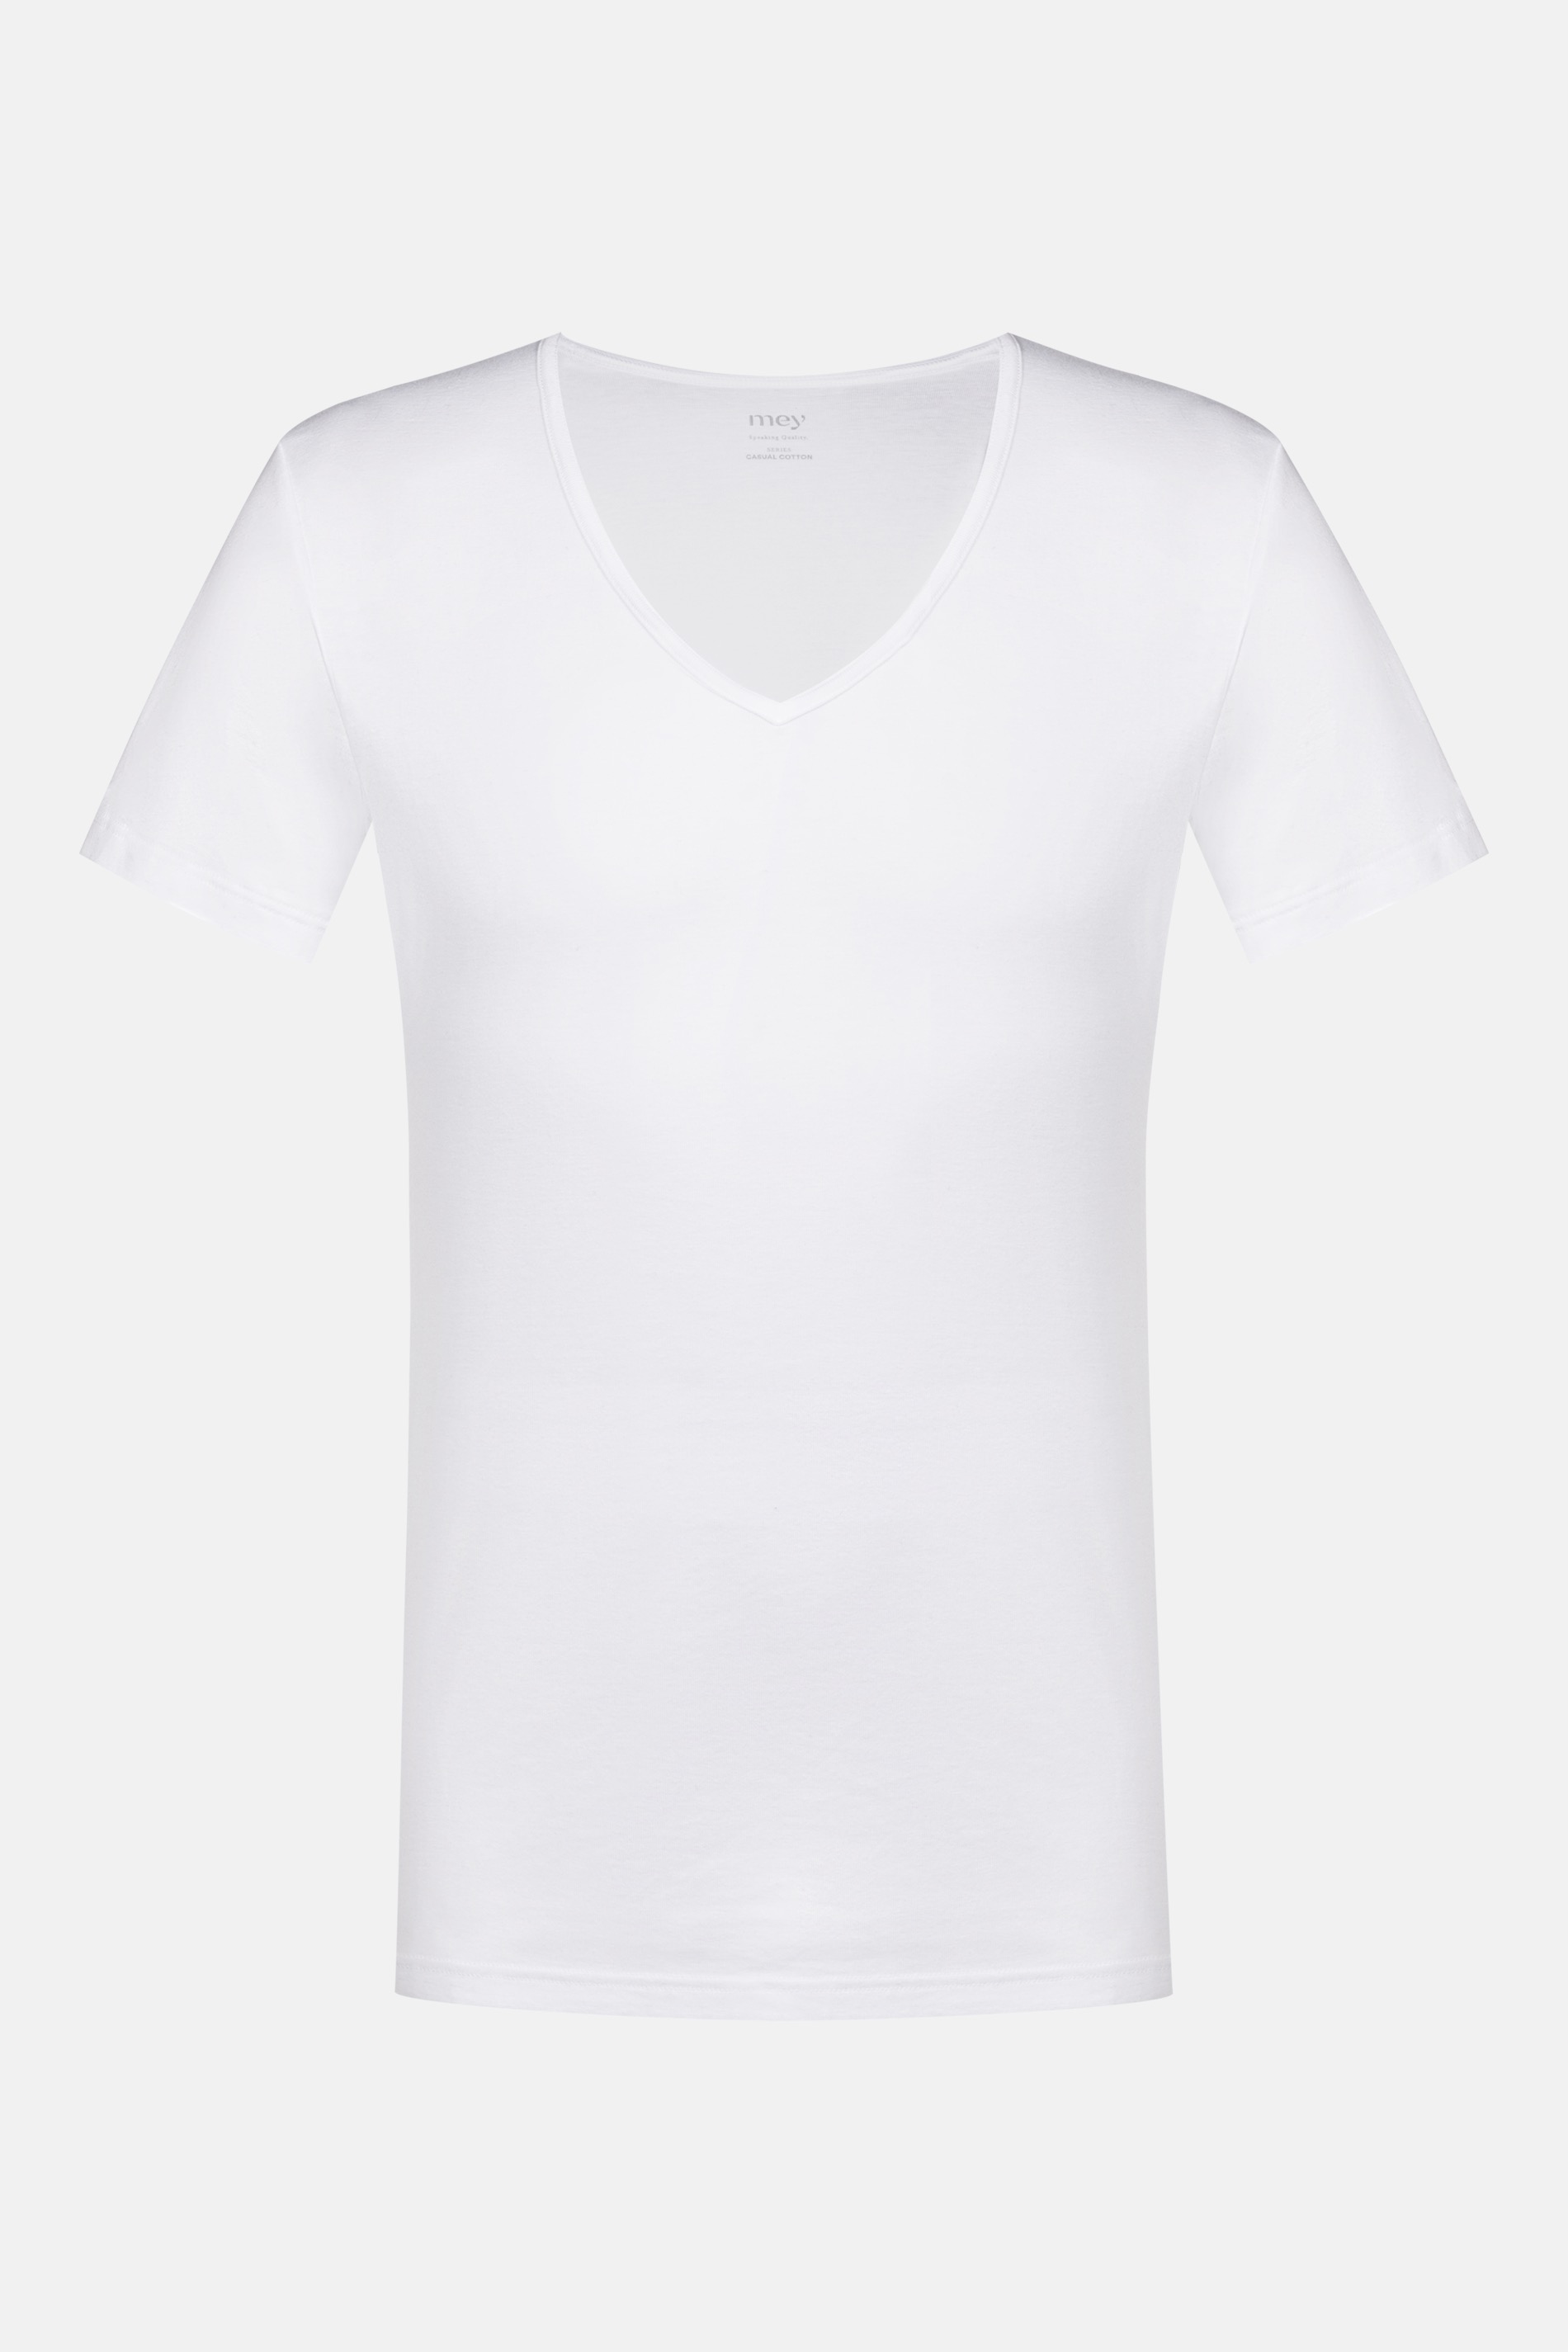 Men's shirt with V-neck White Serie Casual Cotton Cut Out | mey®